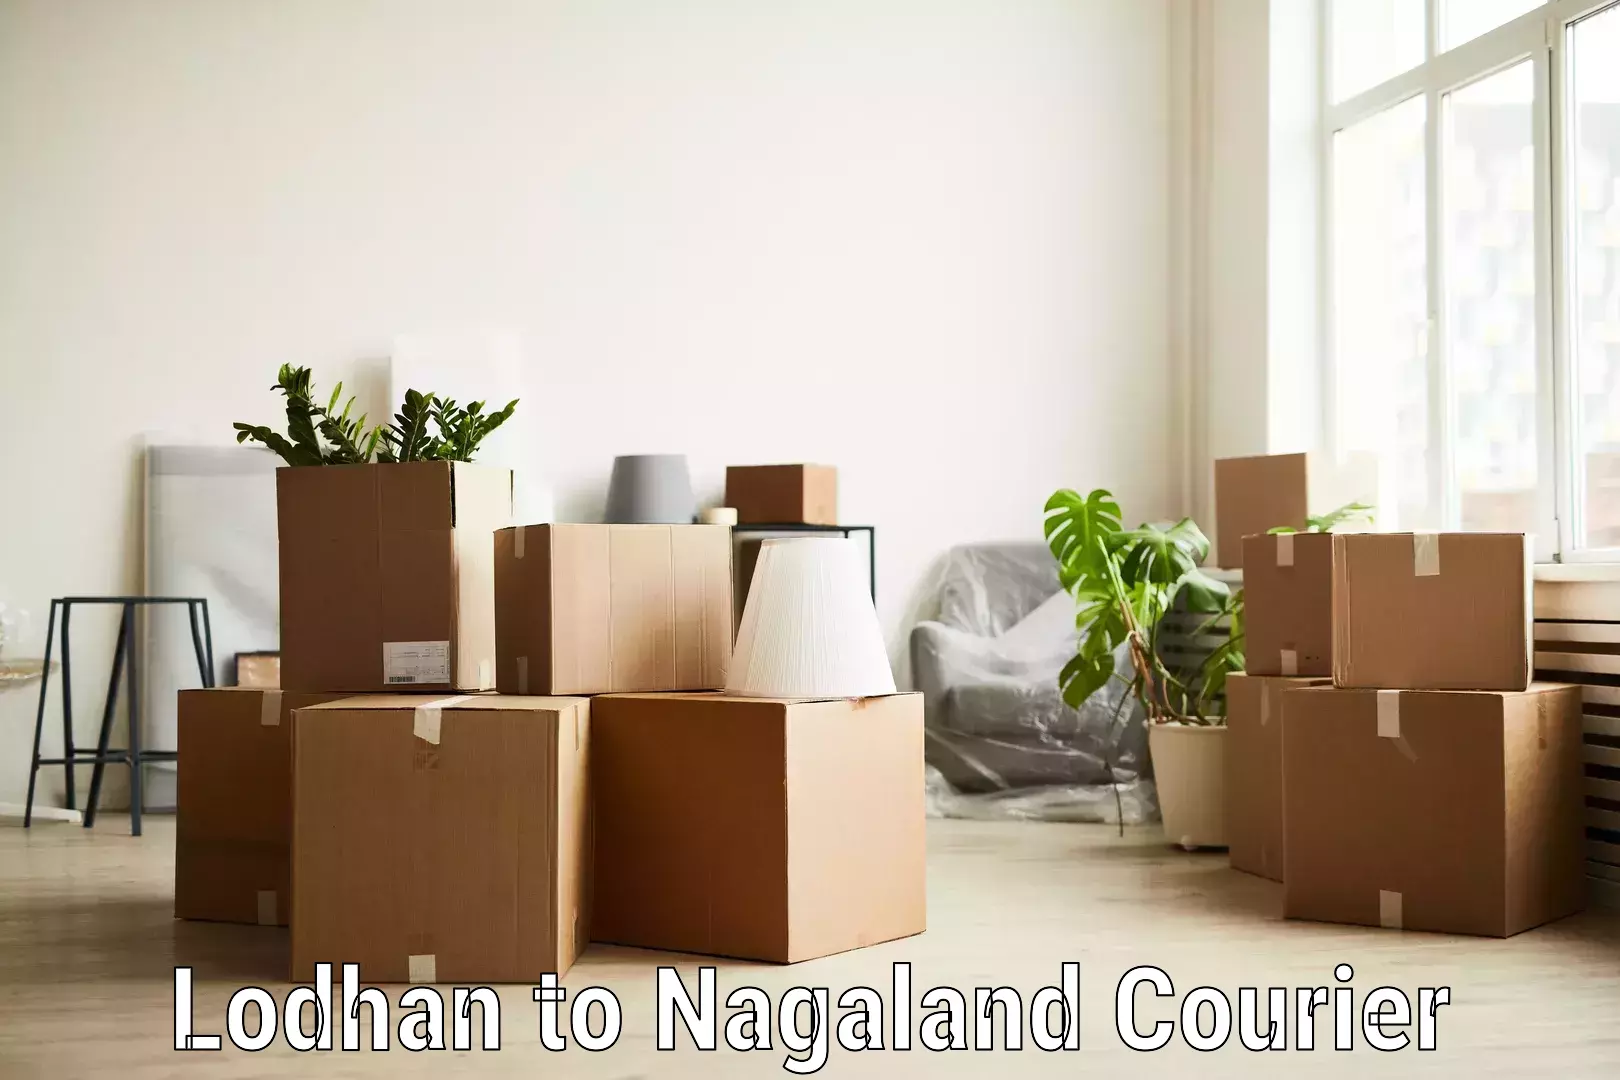 Parcel service for businesses in Lodhan to Nagaland